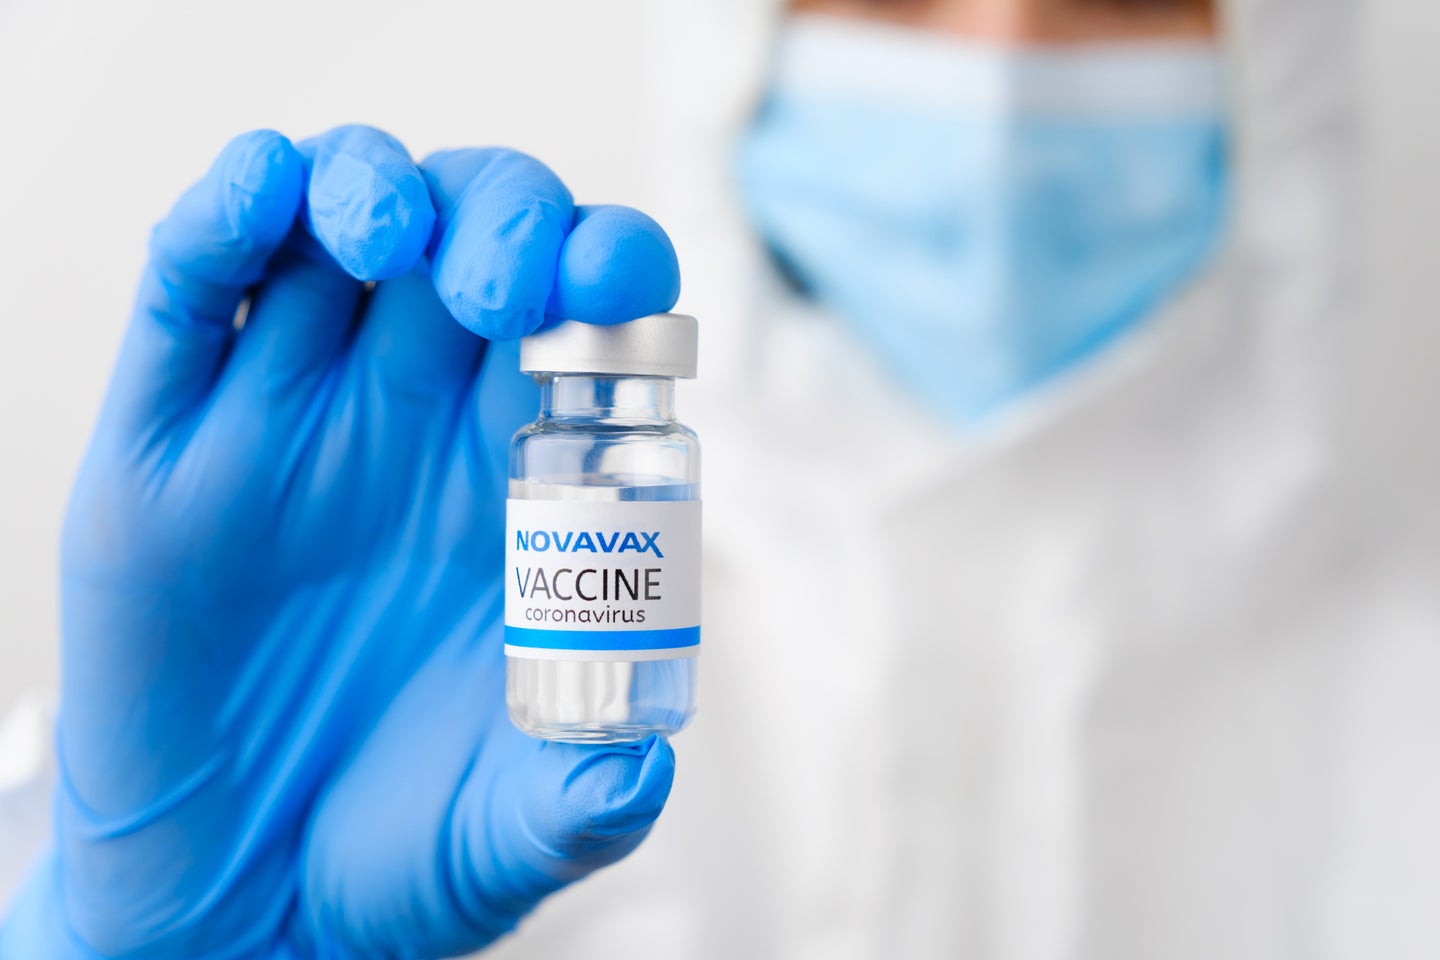 The FDA has just given emergency use authorization to the Novavax vaccine.